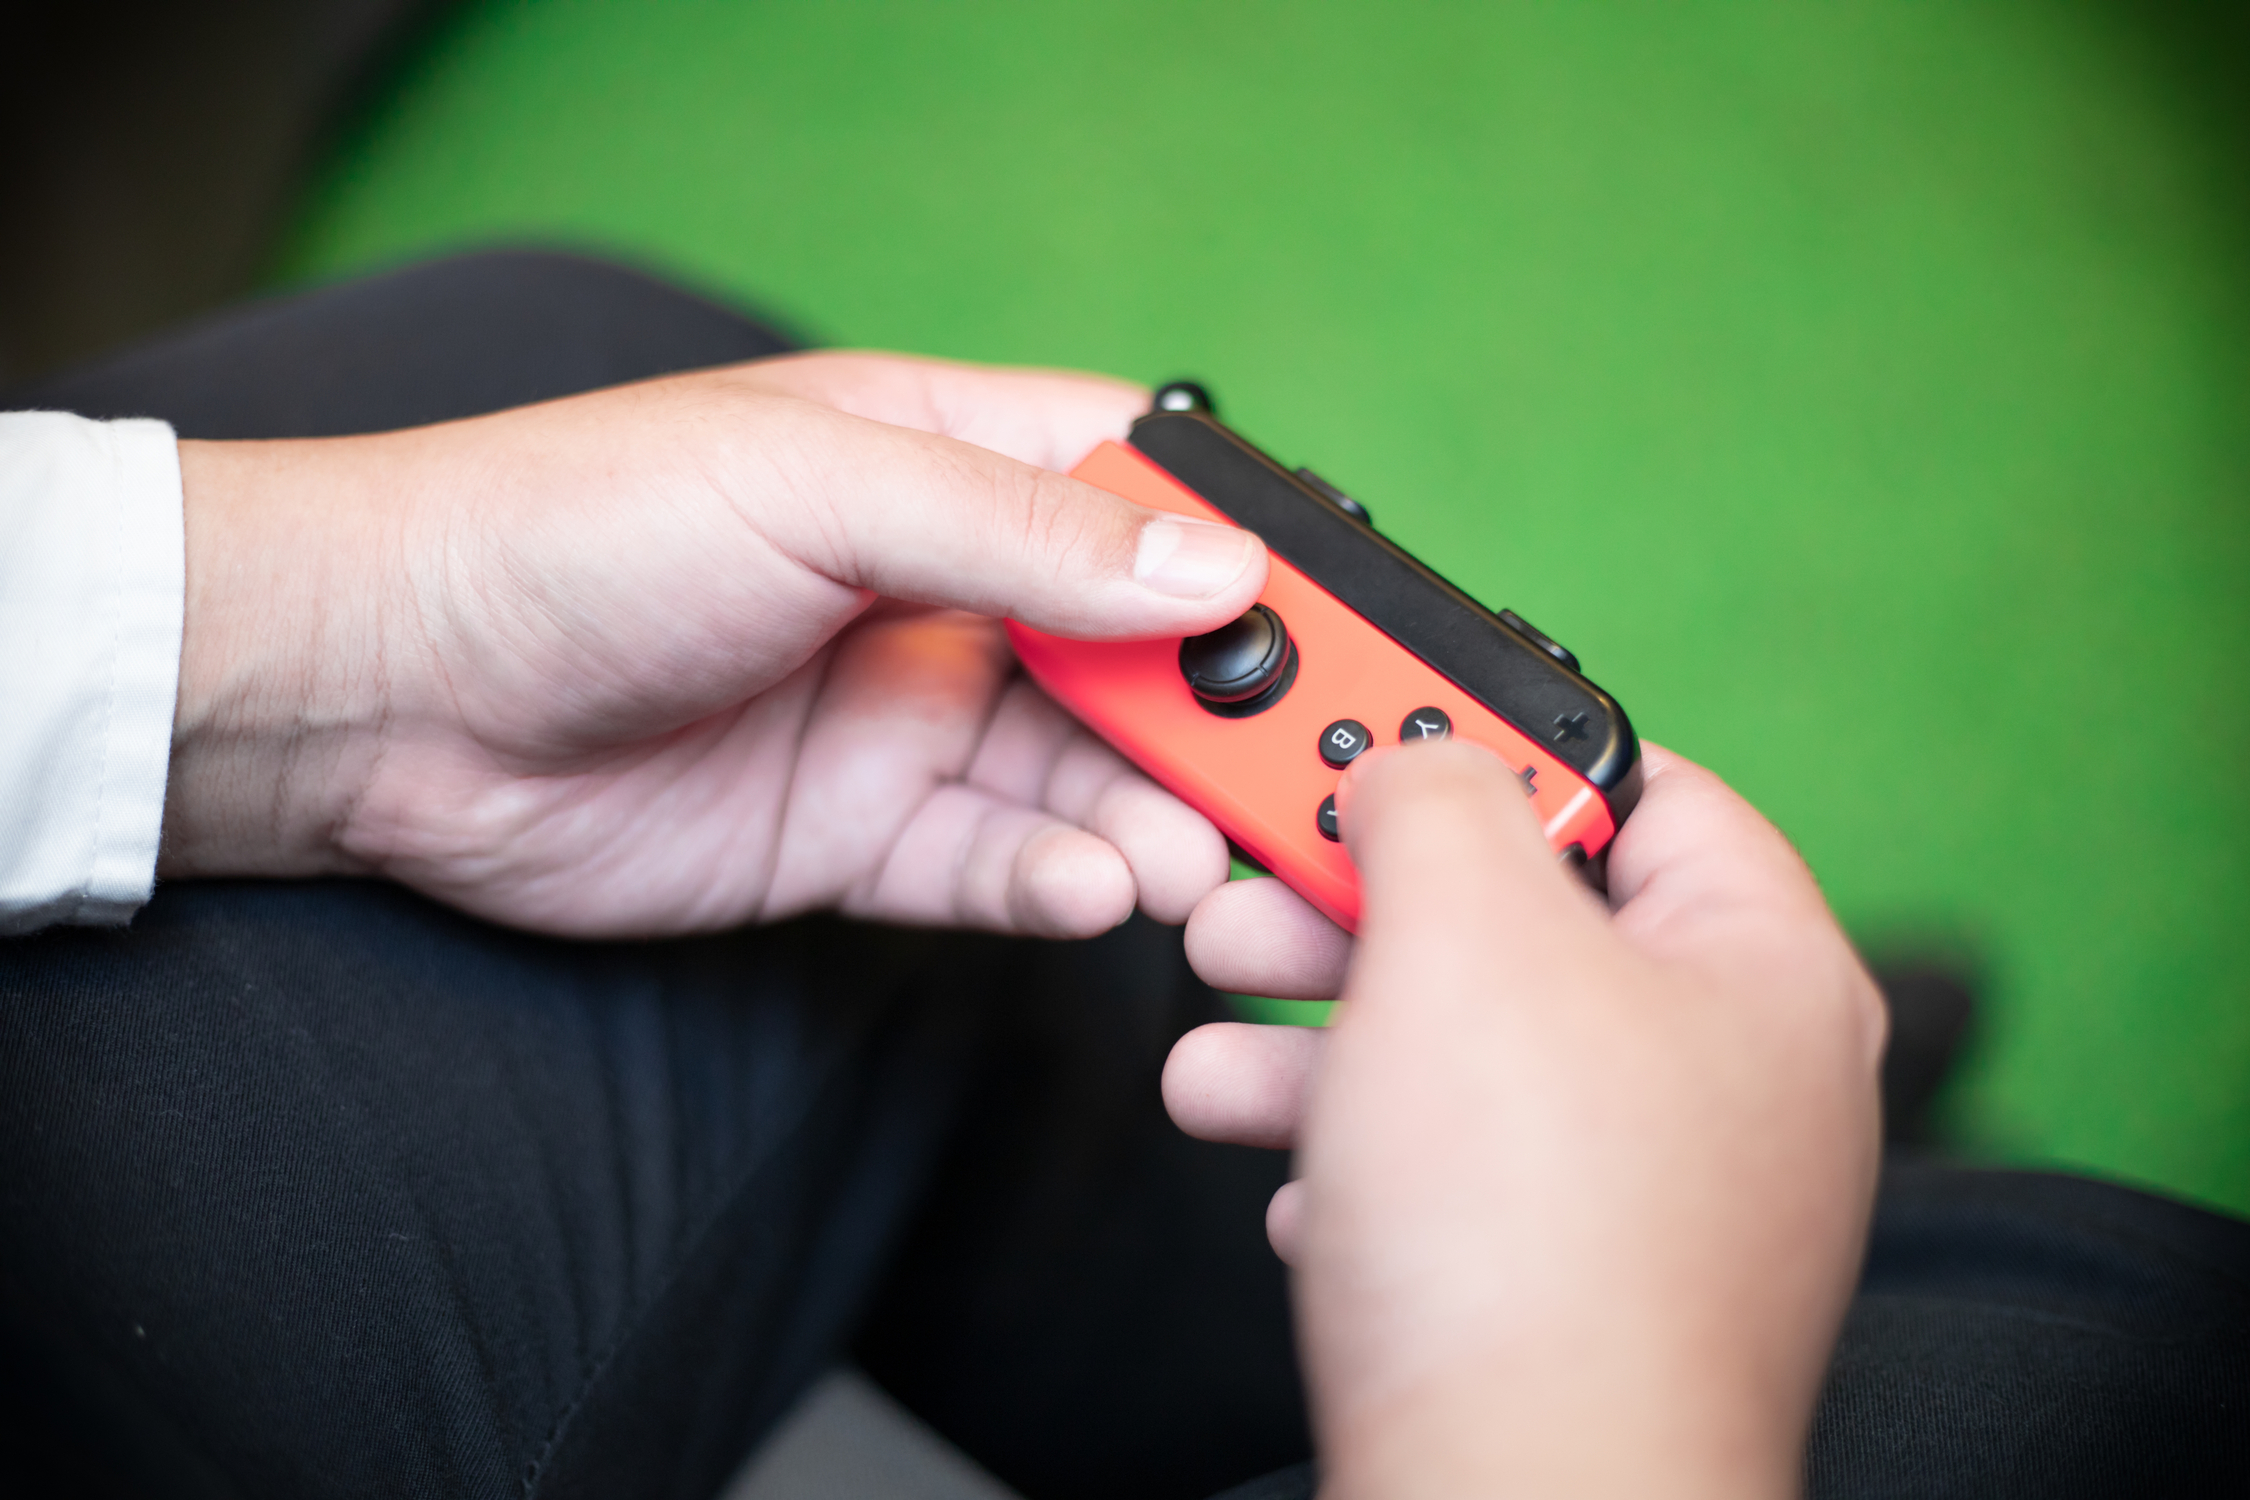 How to Use Nintendo Switch Joy-Cons on PC and Mac